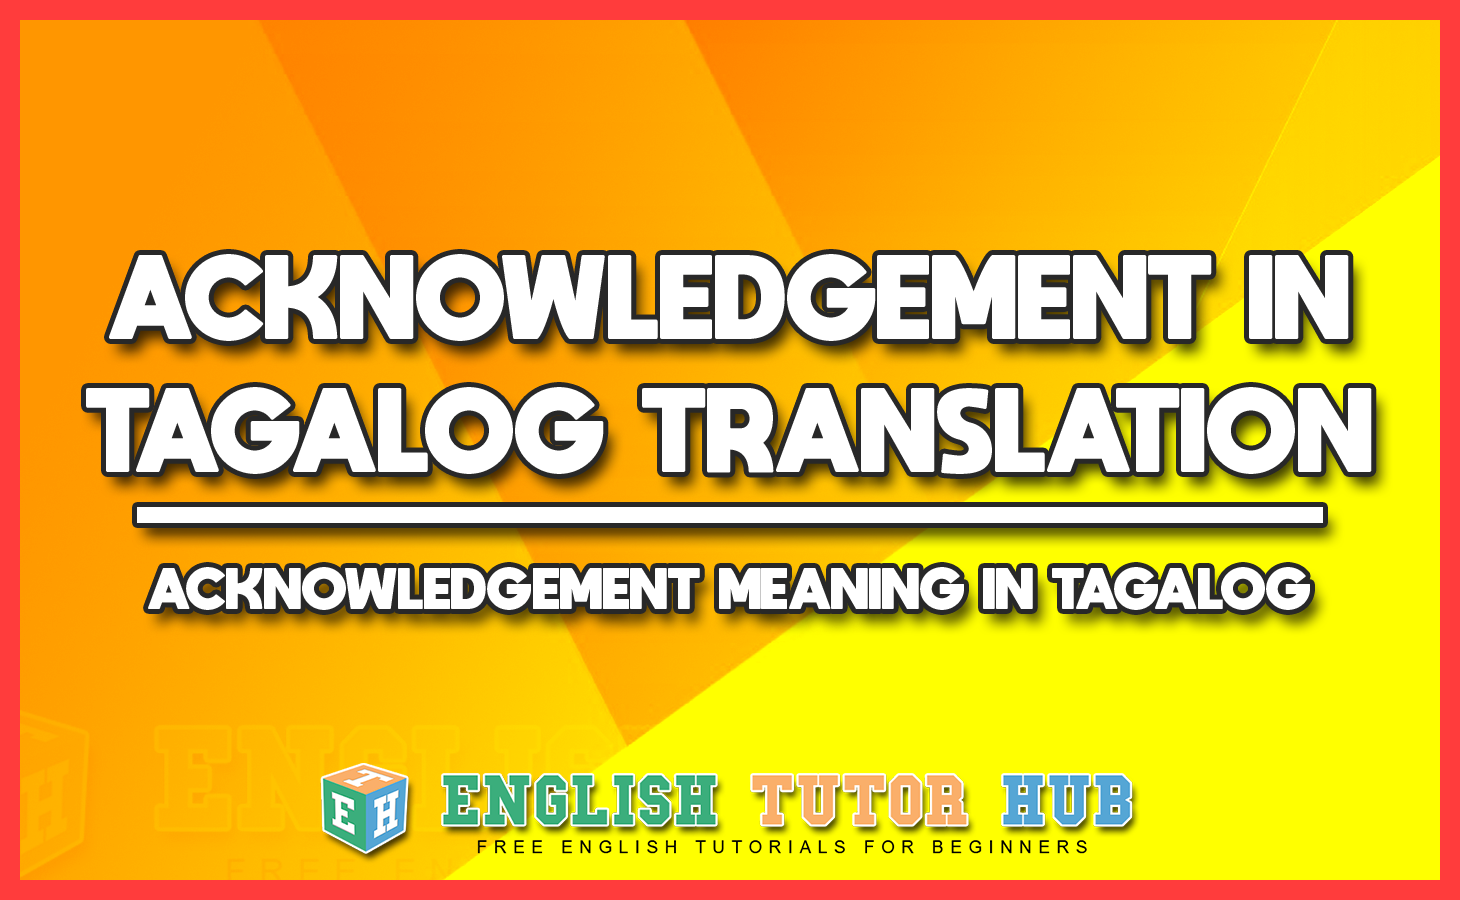 ACKNOWLEDGEMENT IN TAGALOG TRANSLATION - ACKNOWLEDGEMENT MEANING IN TAGALOG